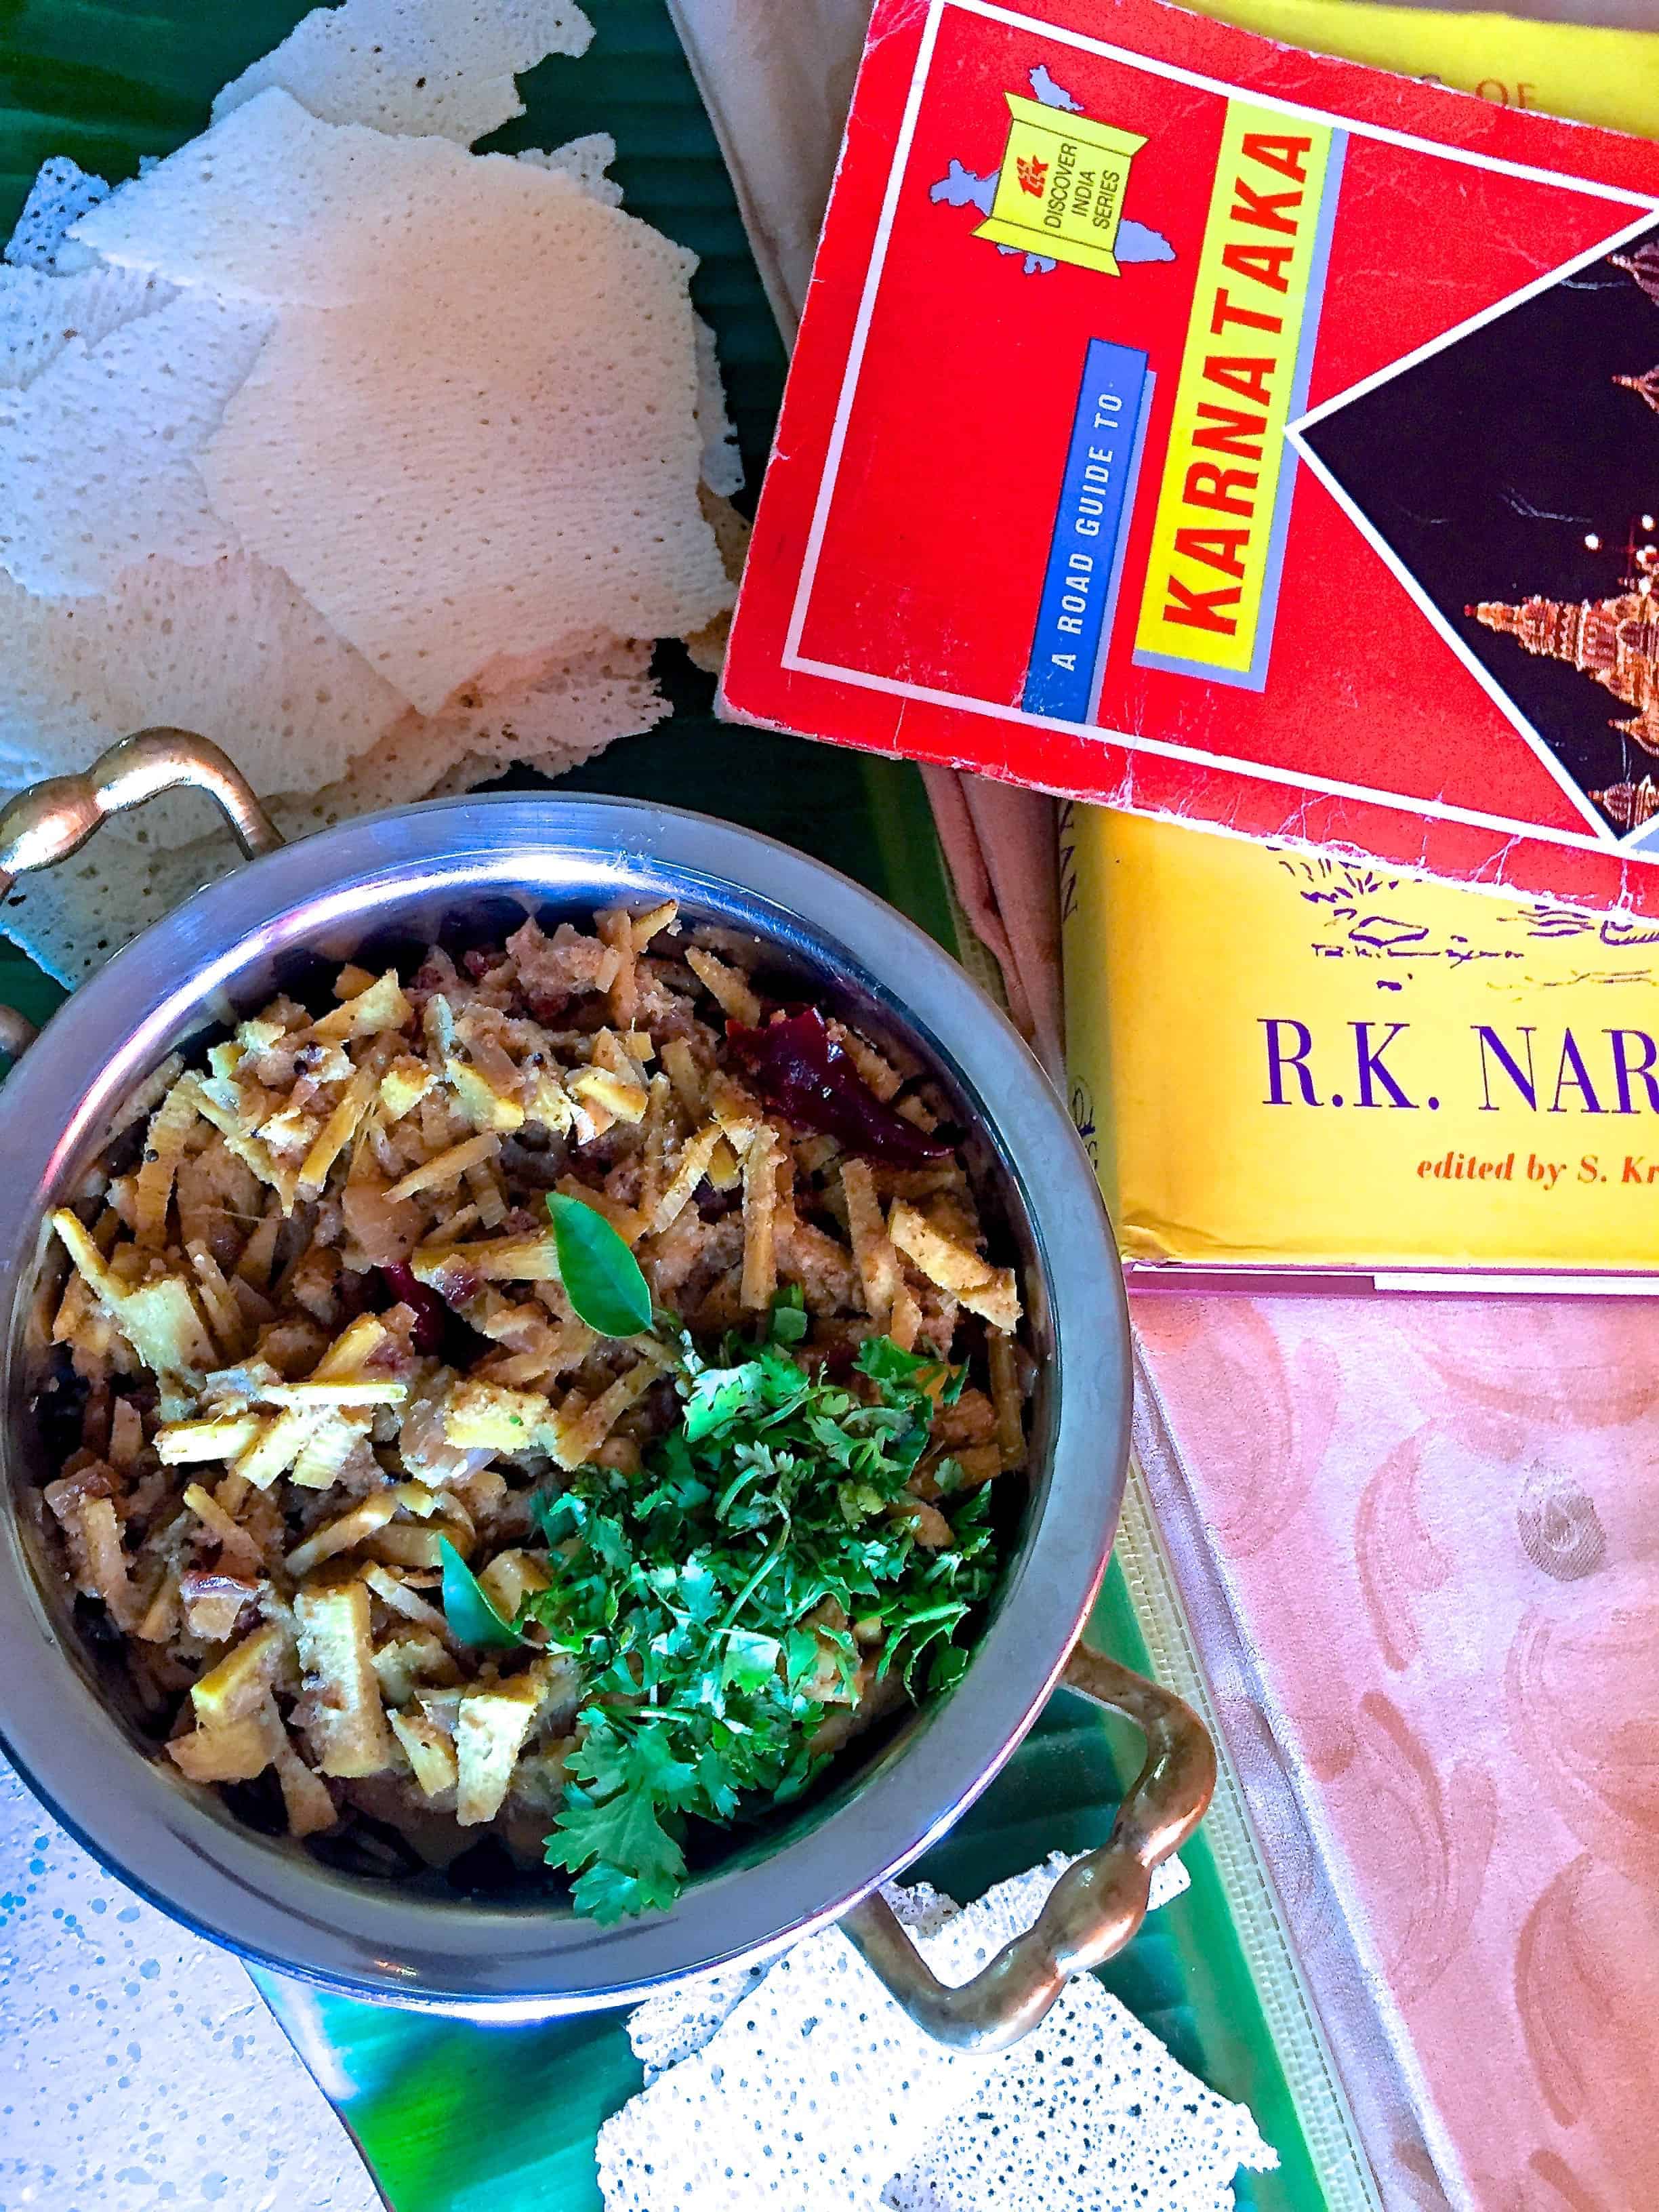 A bowl of bamboo shoot curry with a garnish of coriander leaves and with props showing the Karnataka theme- A guide book to Karnataka, a book by R K Narayanan who lived at Mysore, a Mysore silk saree 